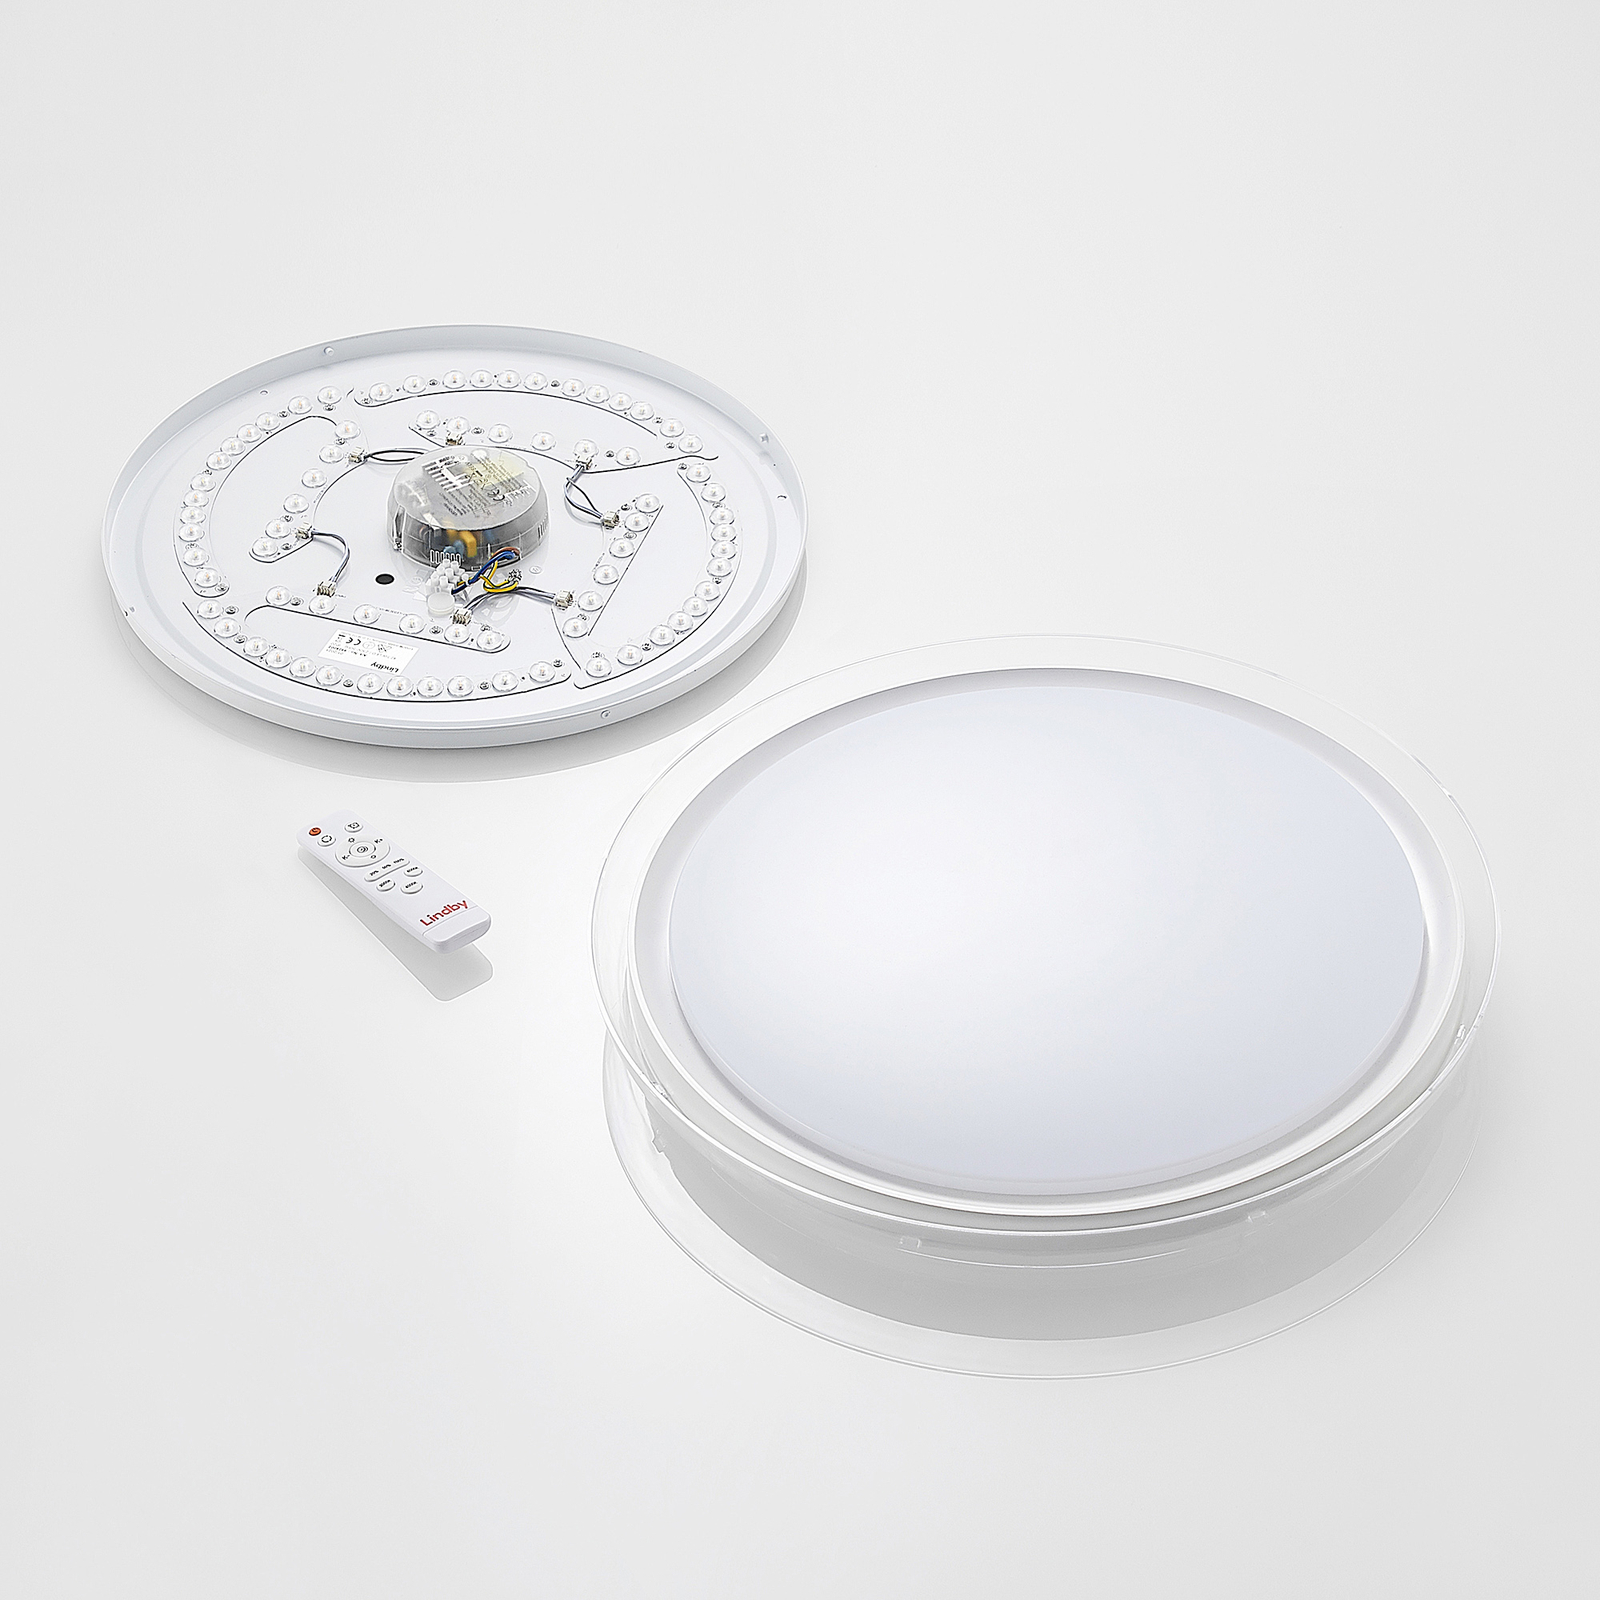 Lindby Sleya LED ceiling light, CCT, dimmable